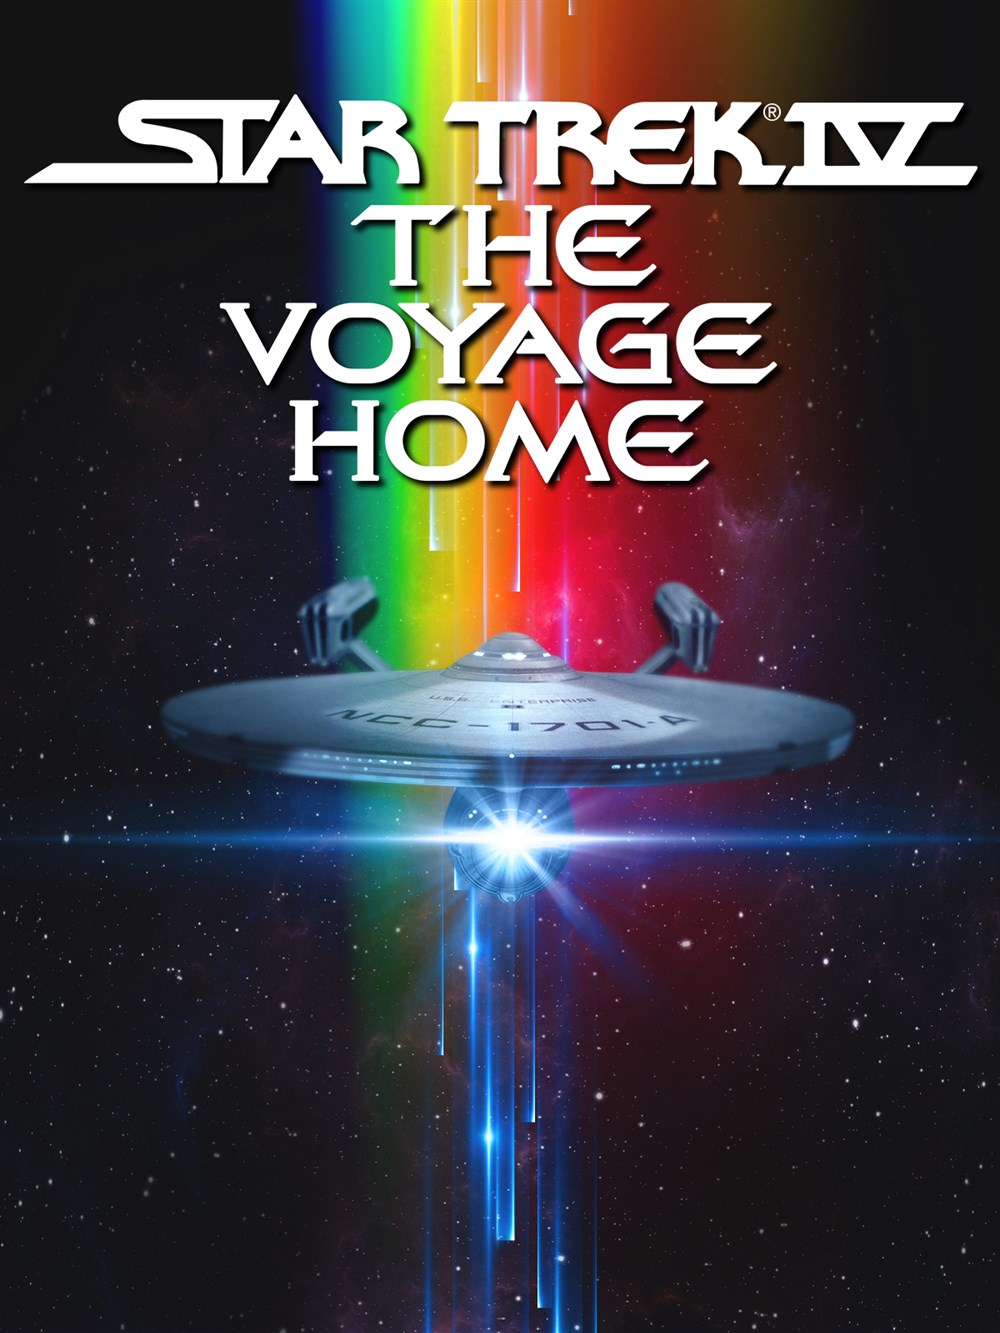 who wrote star trek the voyage home